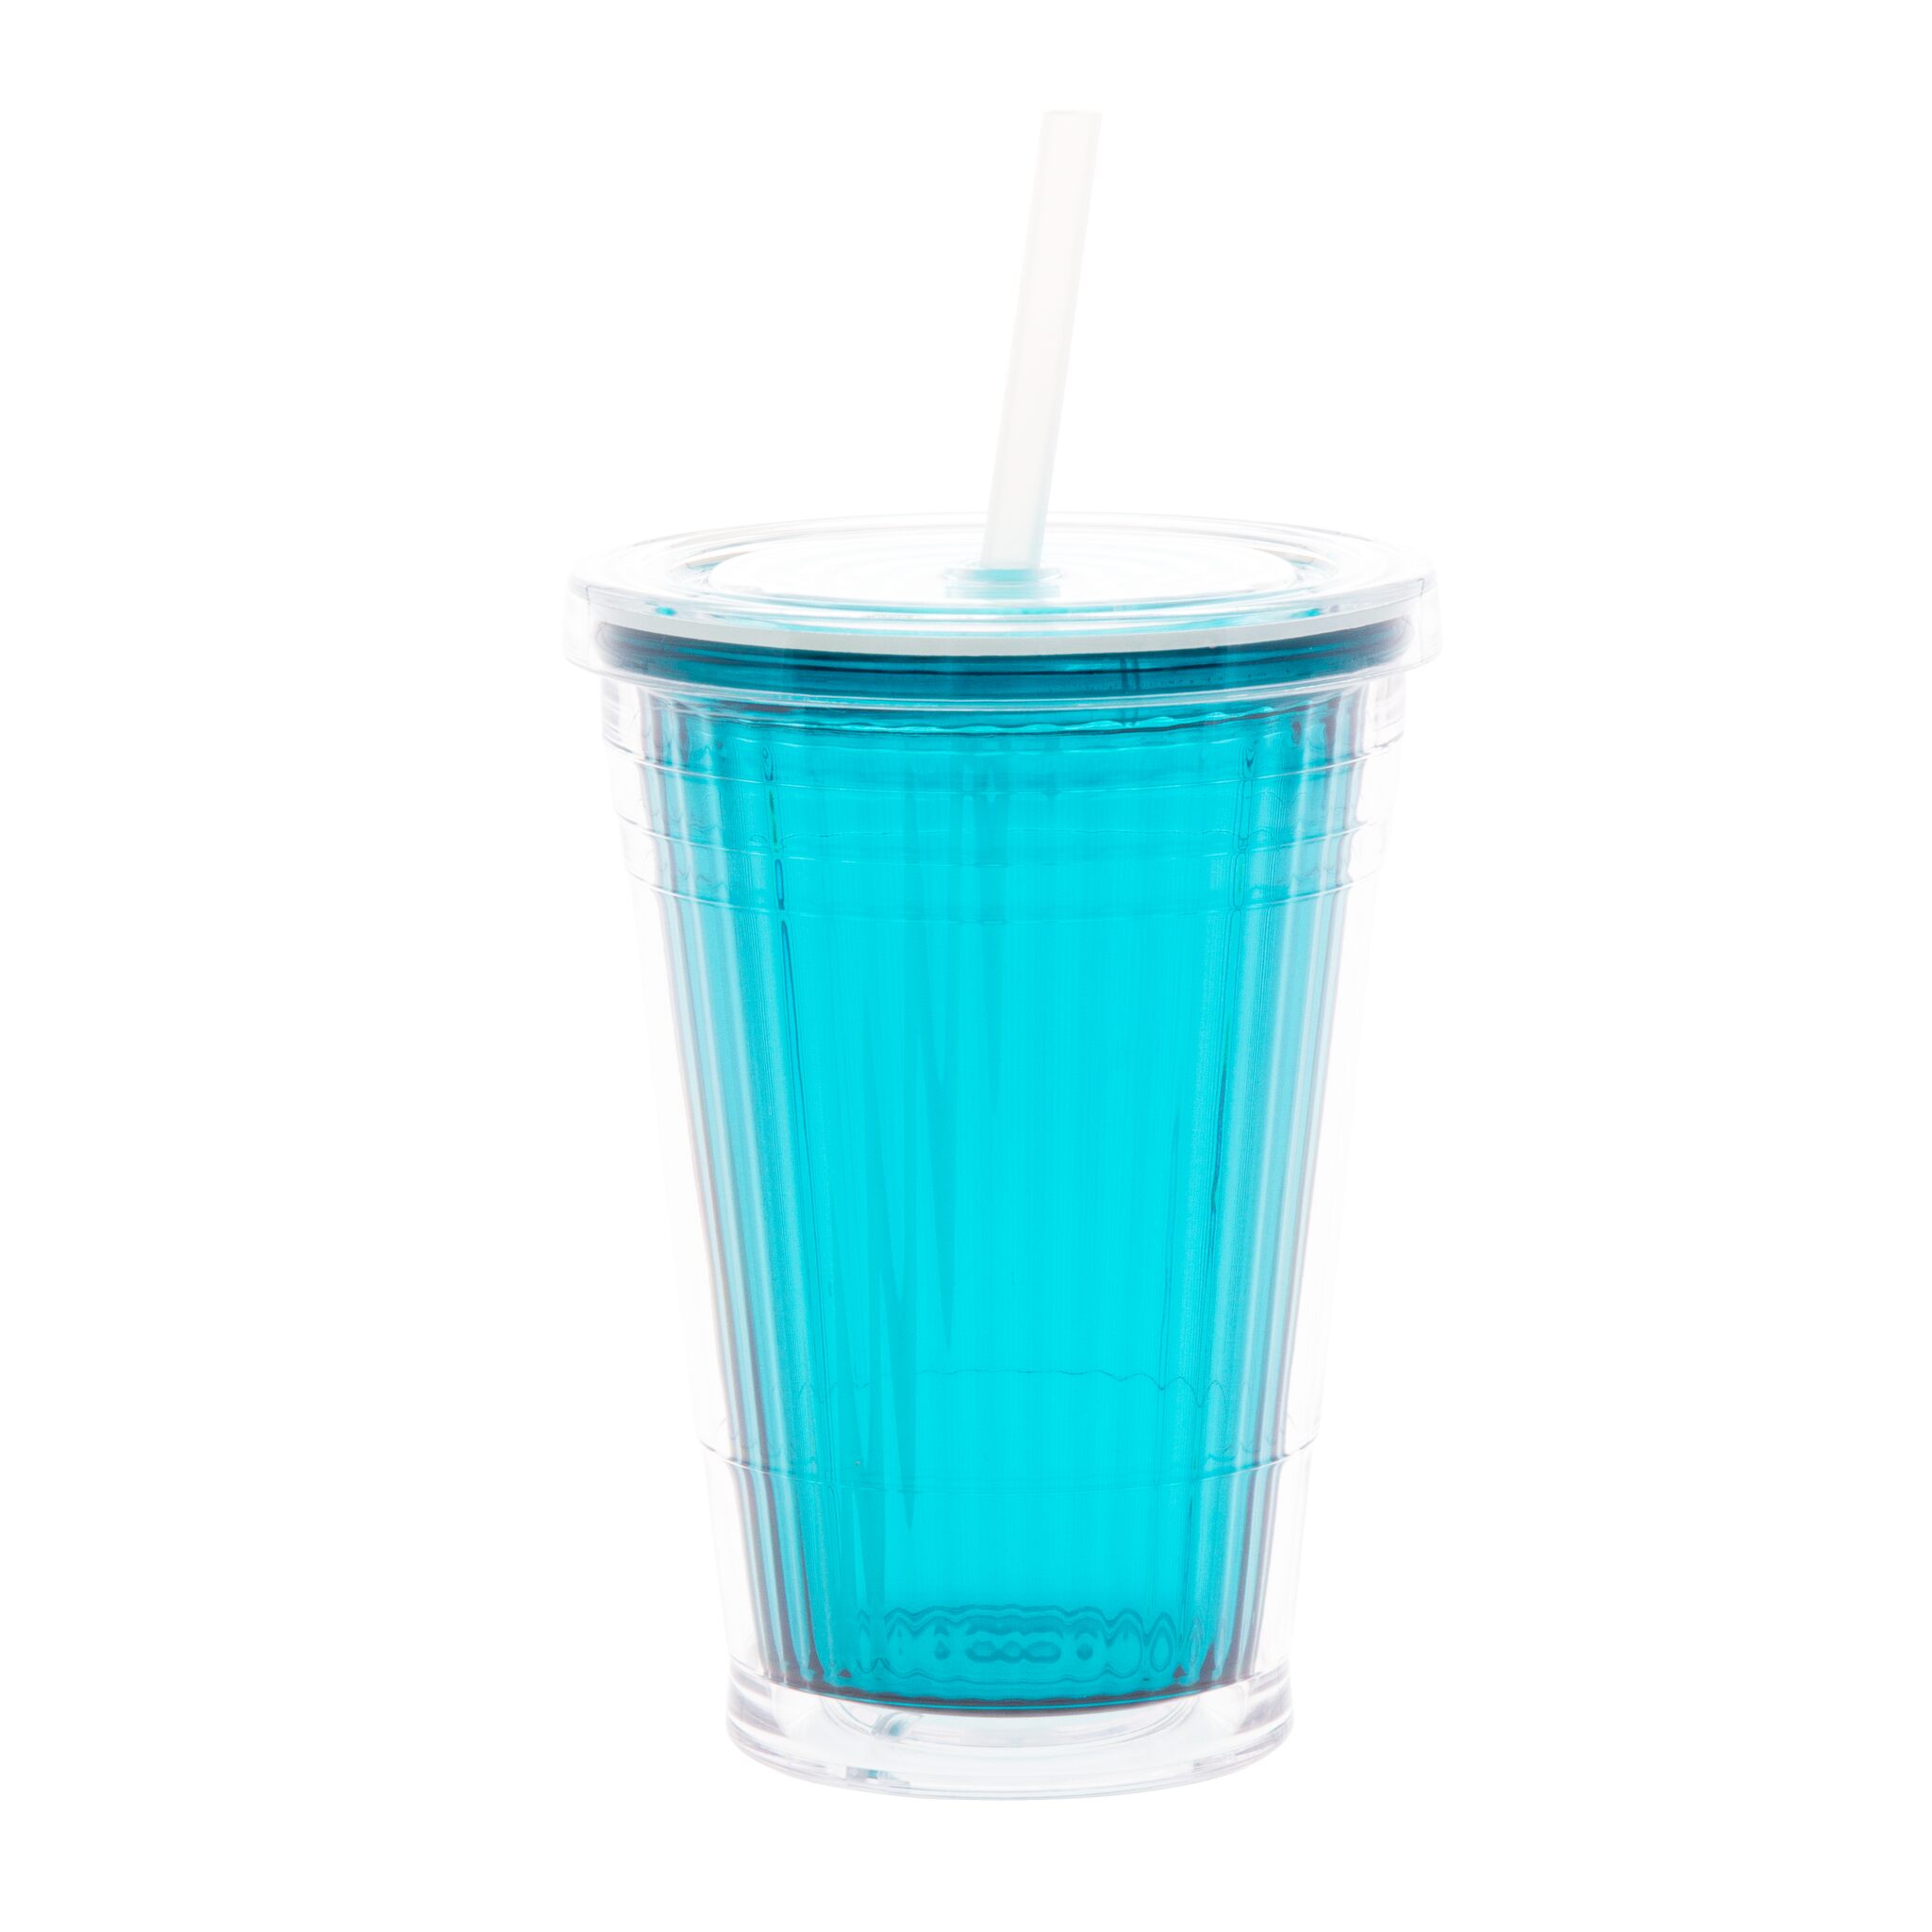 Gimex thermal mug with screw cap and drinking straw